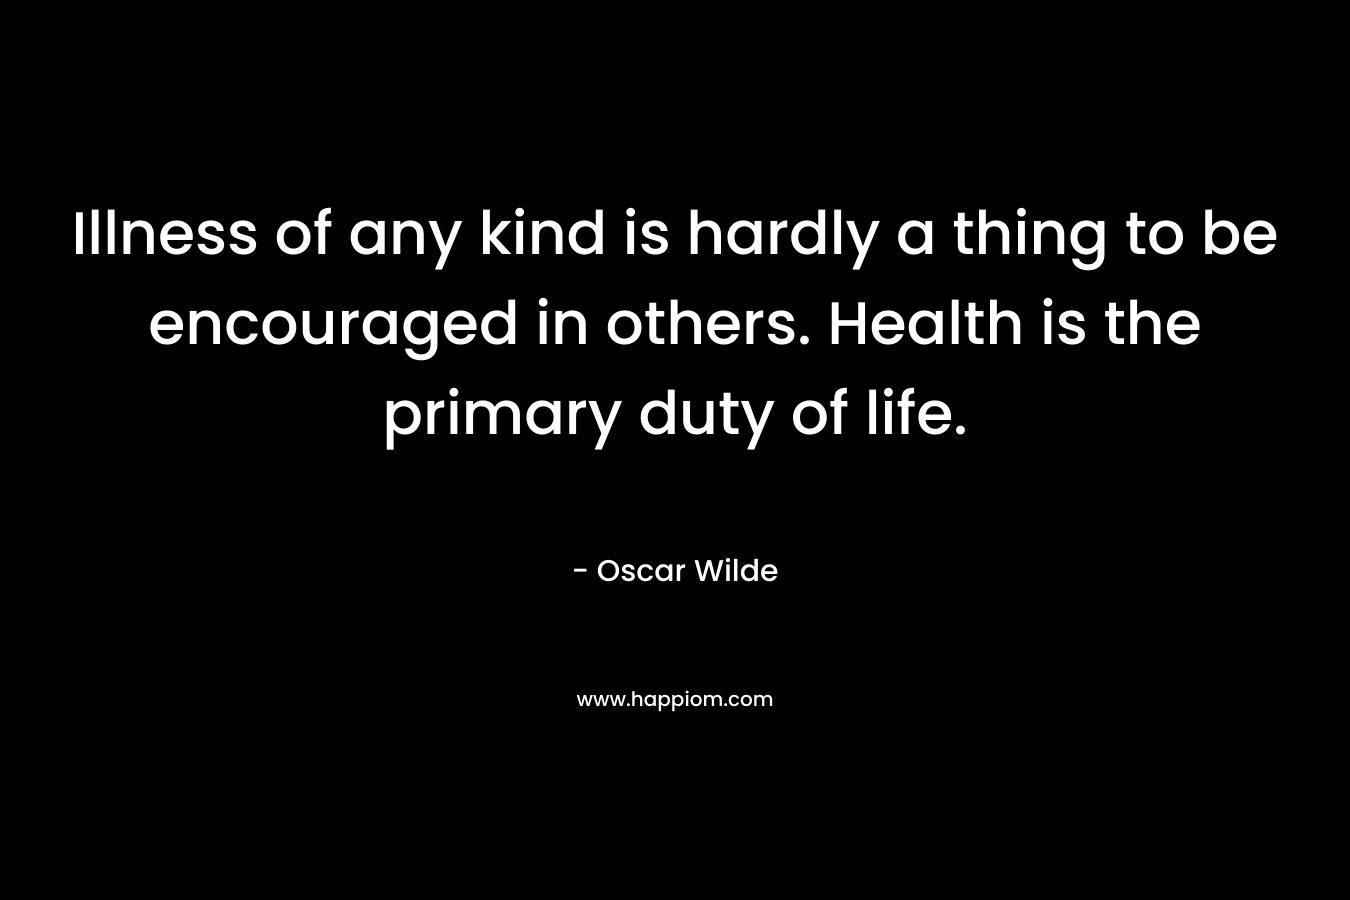 Illness of any kind is hardly a thing to be encouraged in others. Health is the primary duty of life.